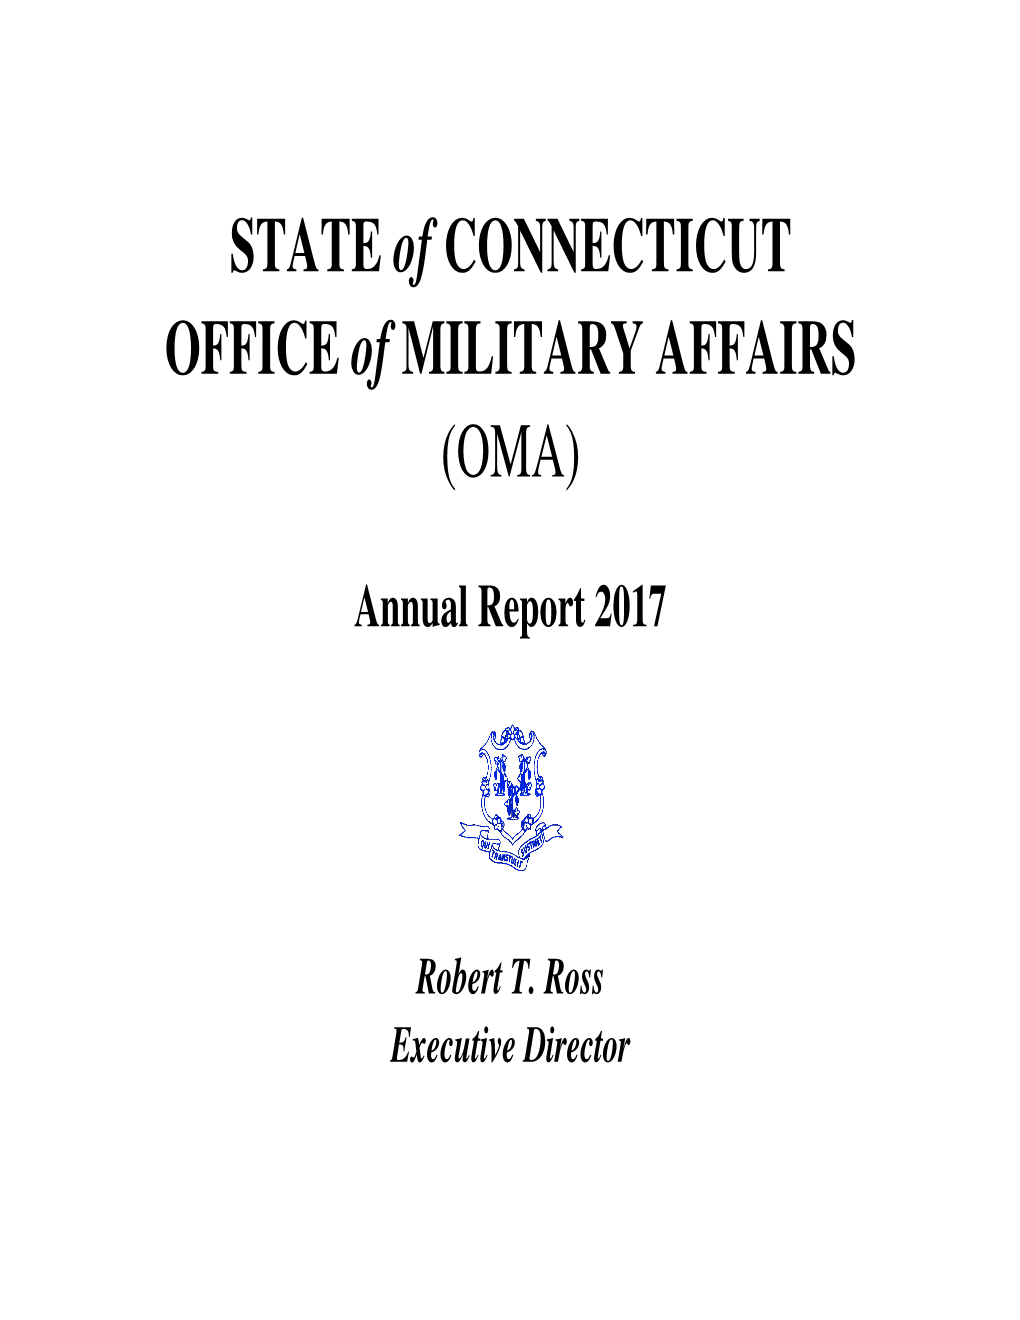 STATE of CONNECTICUT OFFICE of MILITARY AFFAIRS (OMA)